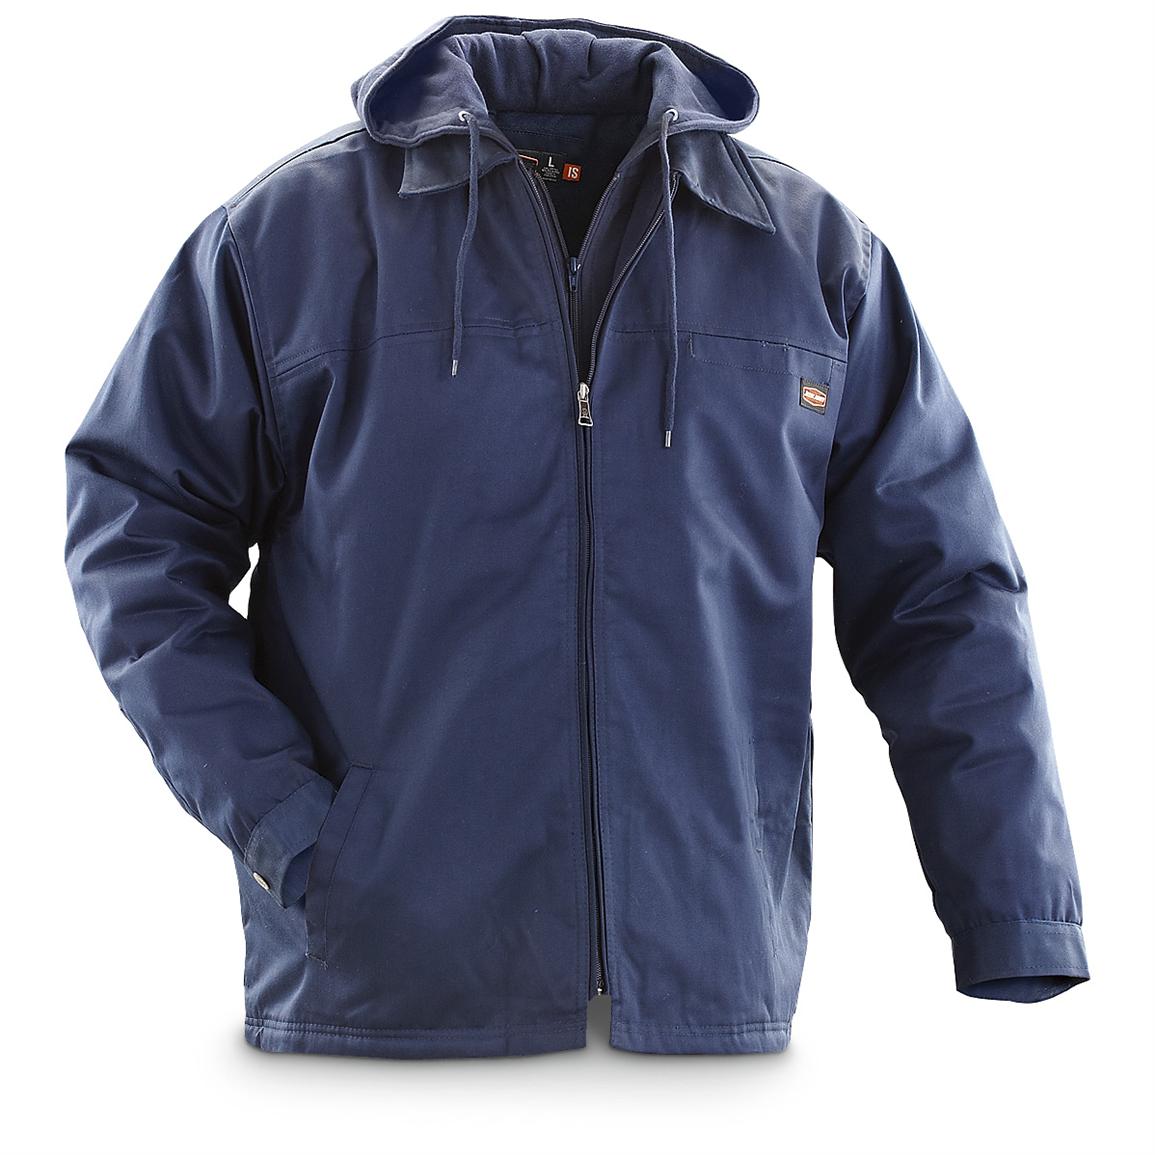 Jesse James Work Coat - 221080, Insulated Jackets & Coats at Sportsman ...